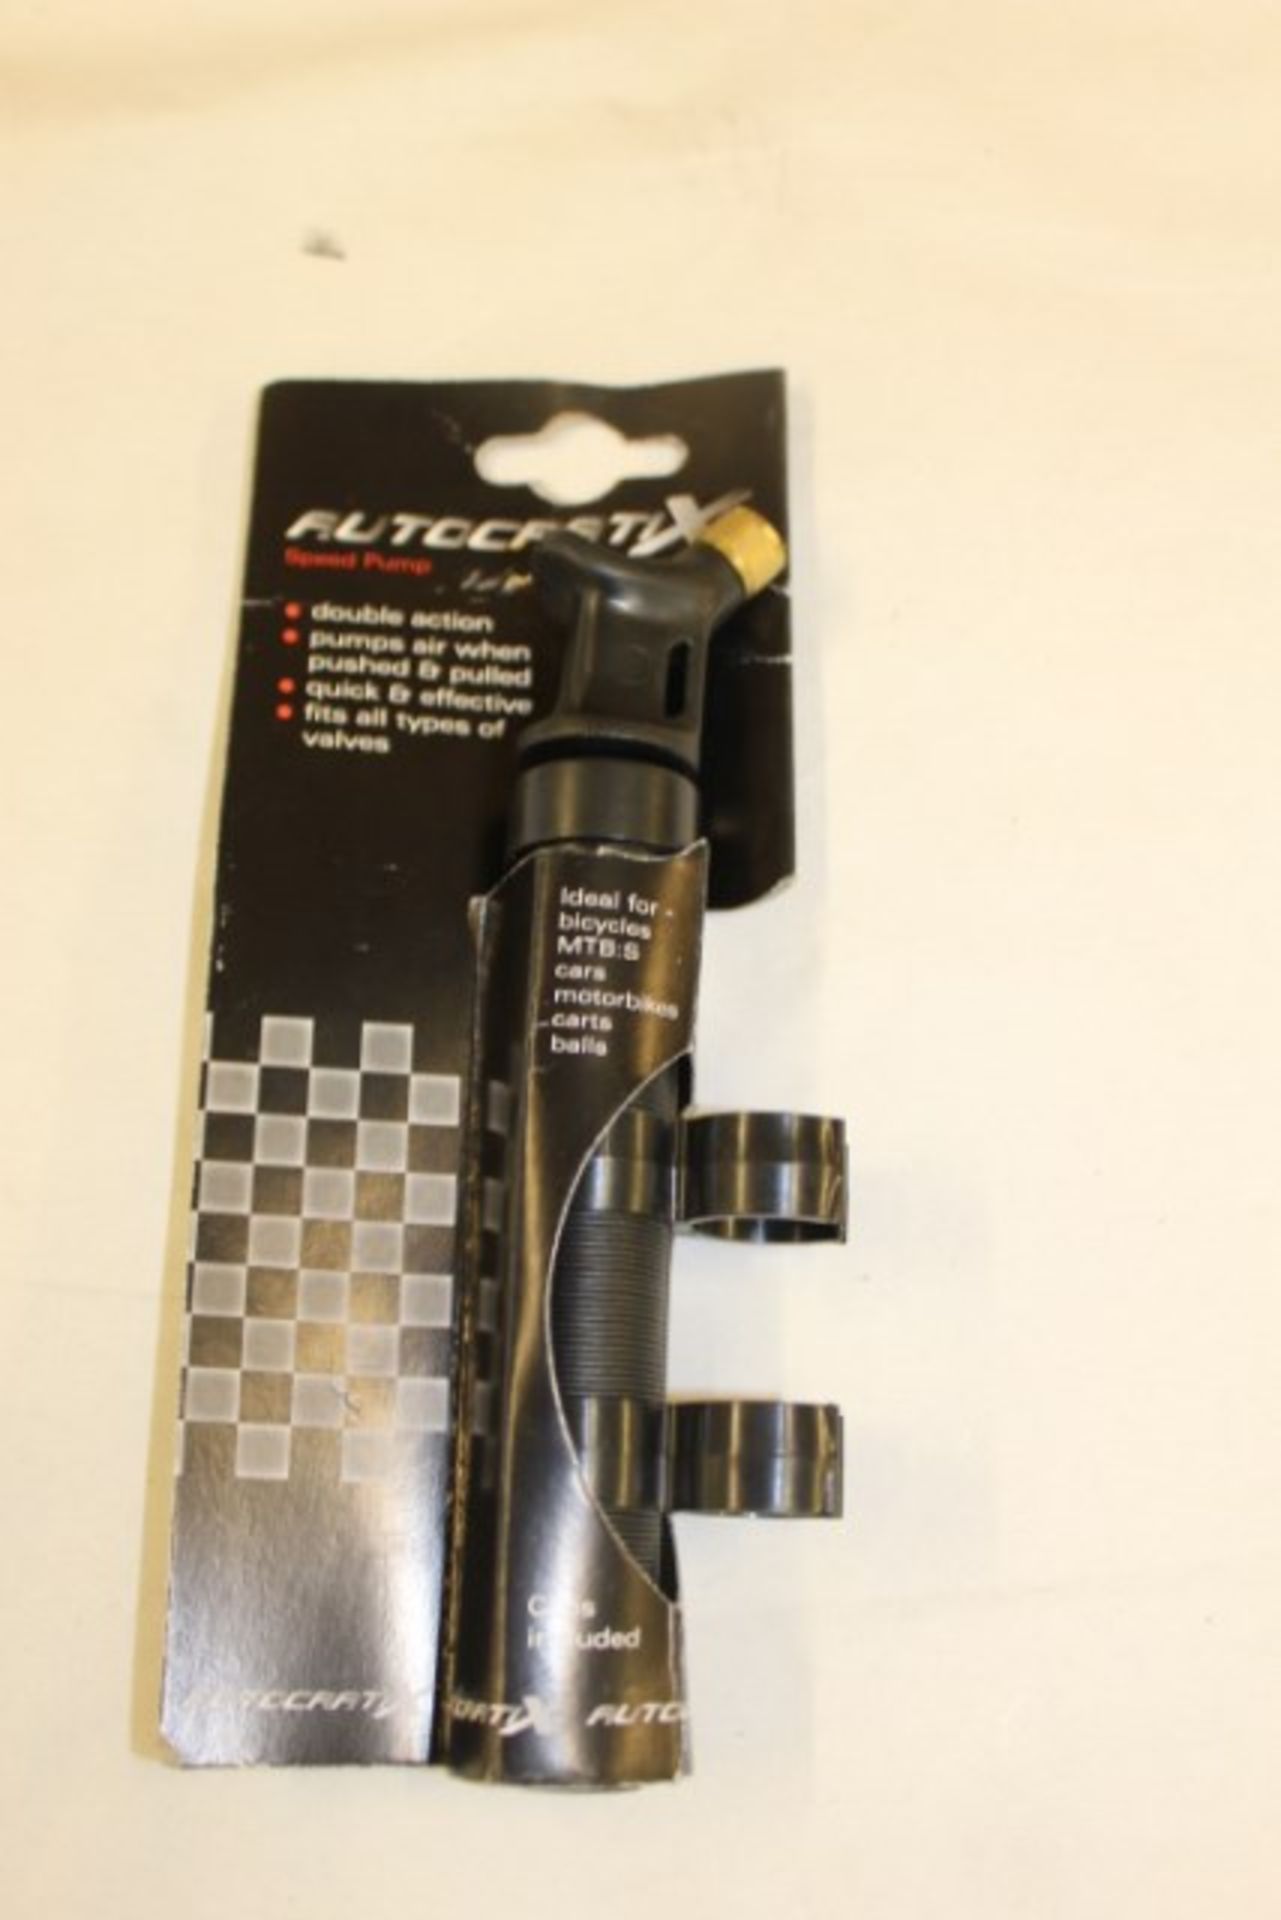 V *TRADE QTY* Autocratix Double Action Bicycle Speed Pump X 4 YOUR BID PRICE TO BE MULTIPLIED BY